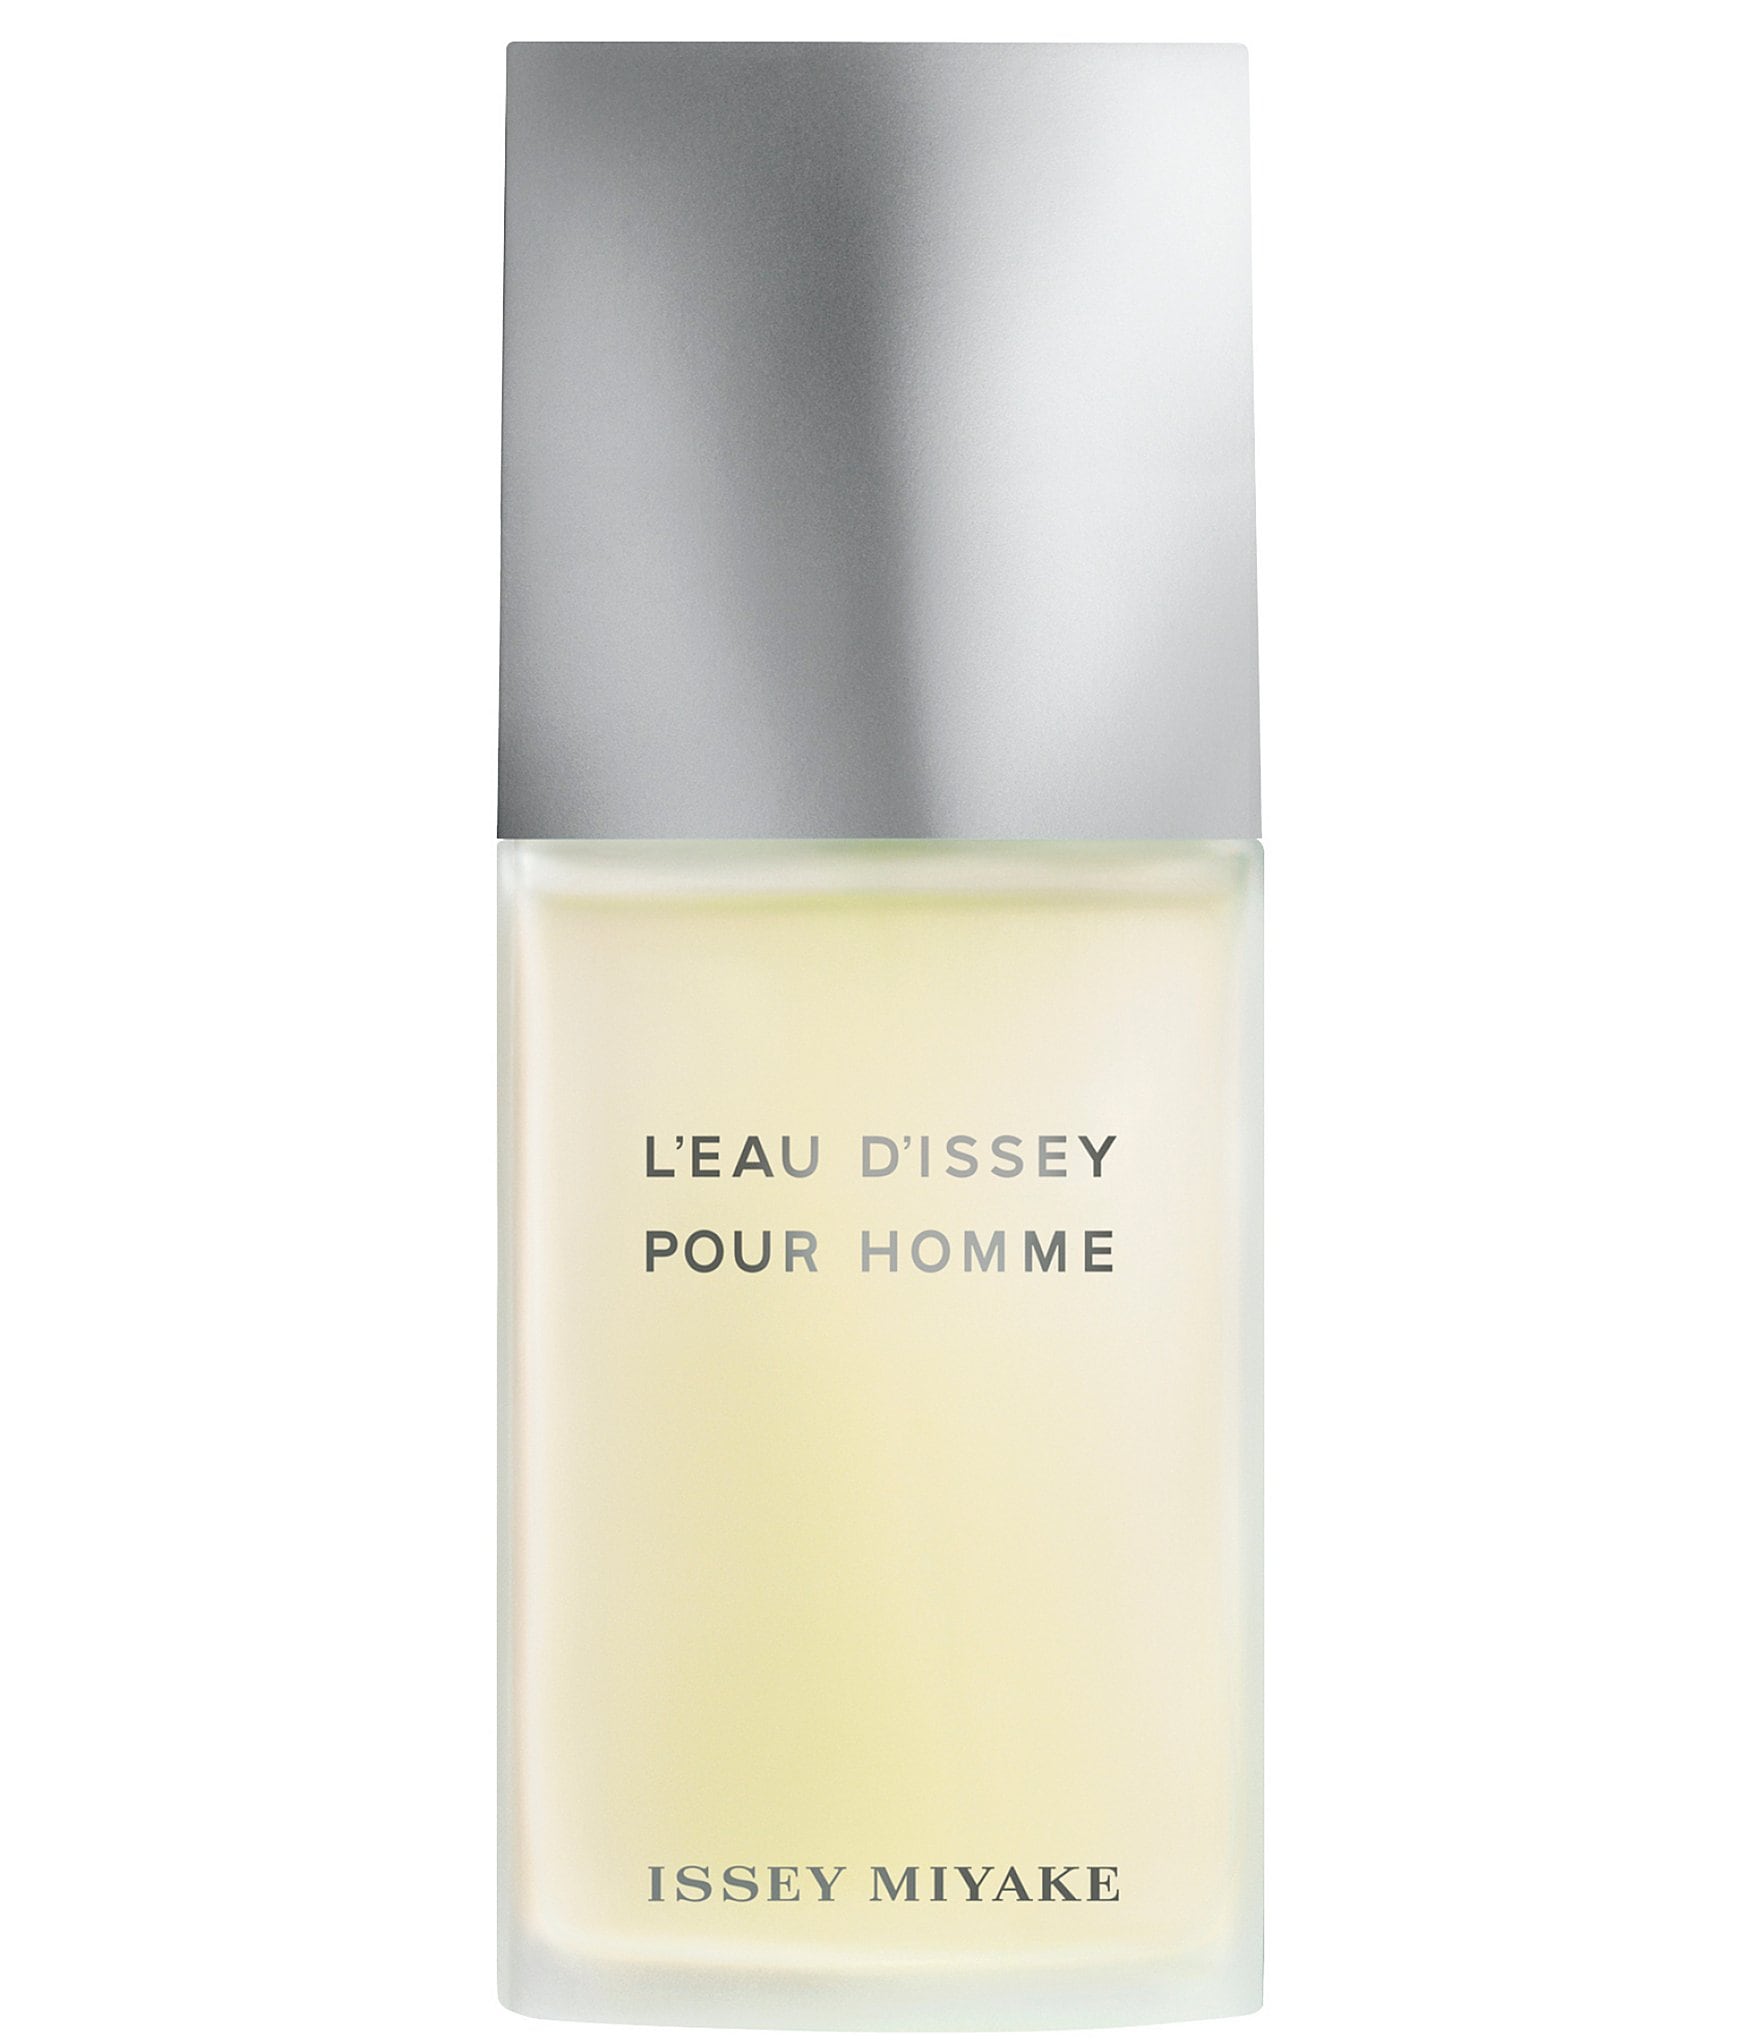 Leau Dissey by Issey Miyake for Men - 2 PC Gift Set - 2.5 oz